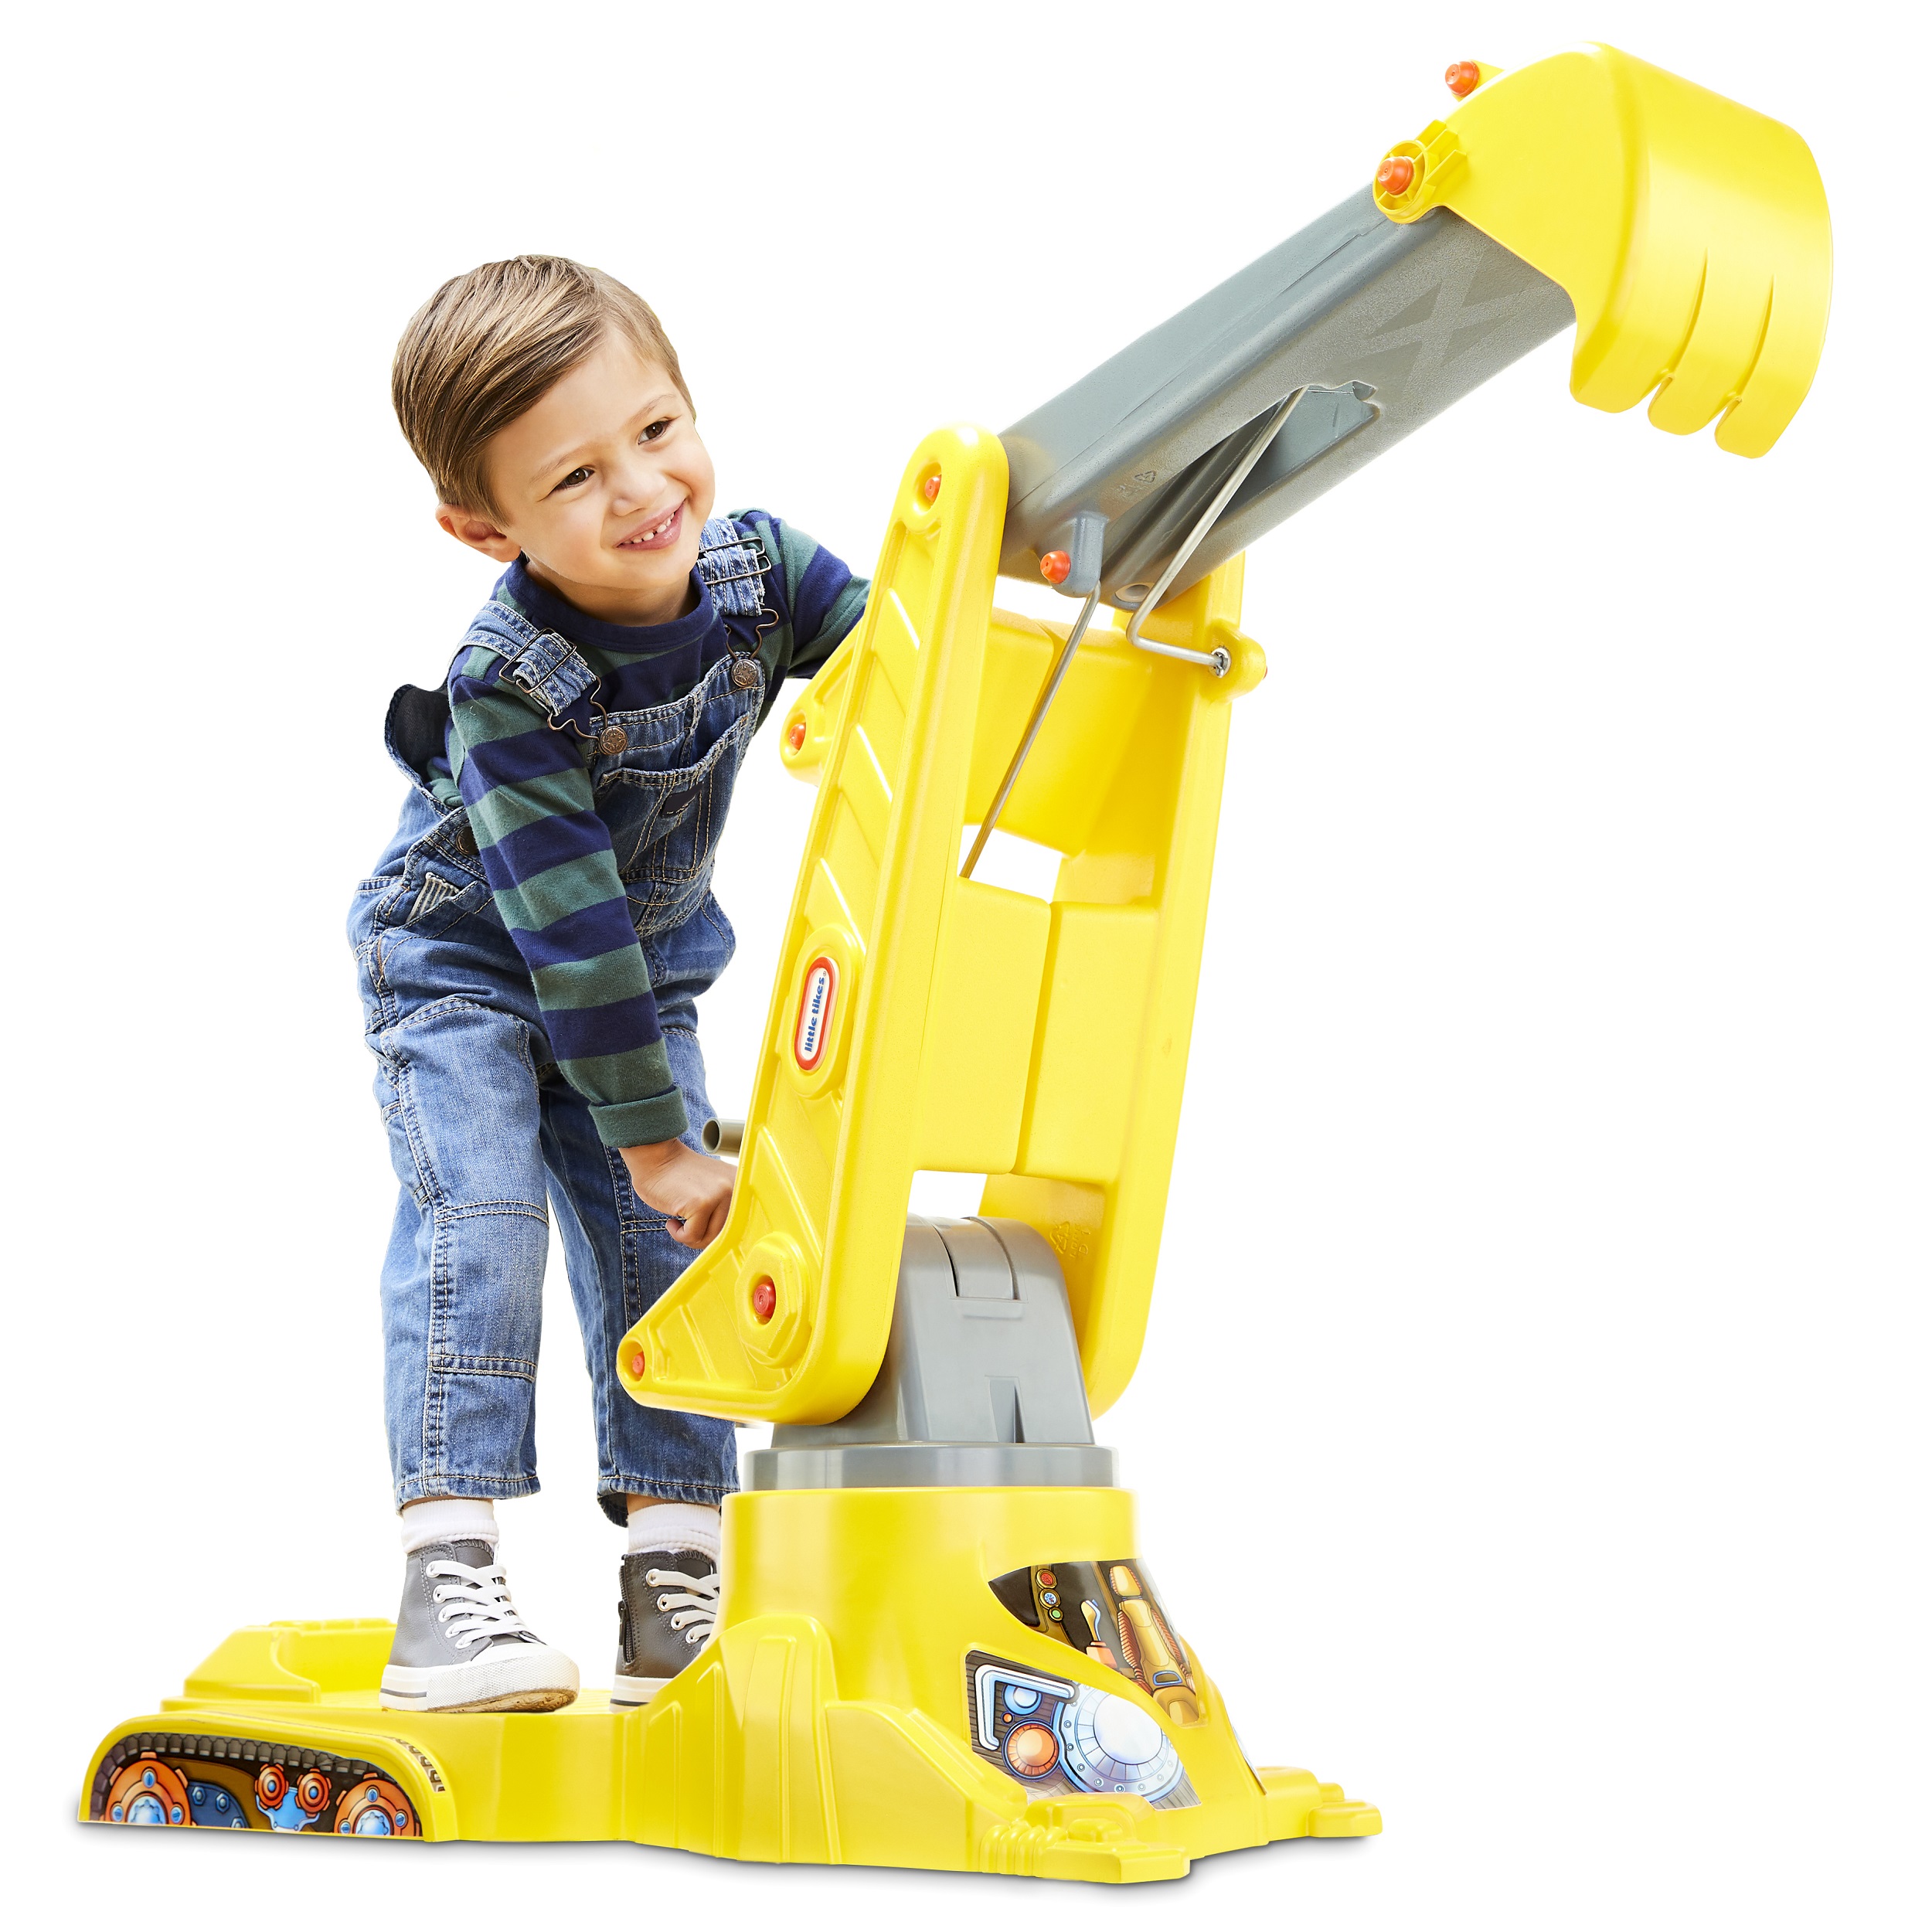 Little Tikes You Drive Sand Toy Excavator with Swivel For Sit and Stand Scoop and Dump Play Set with Kid-Sized Crane, Yellow- Toys For Kids Toddlers Boys Girls Ages 3 4 5+ - image 1 of 7